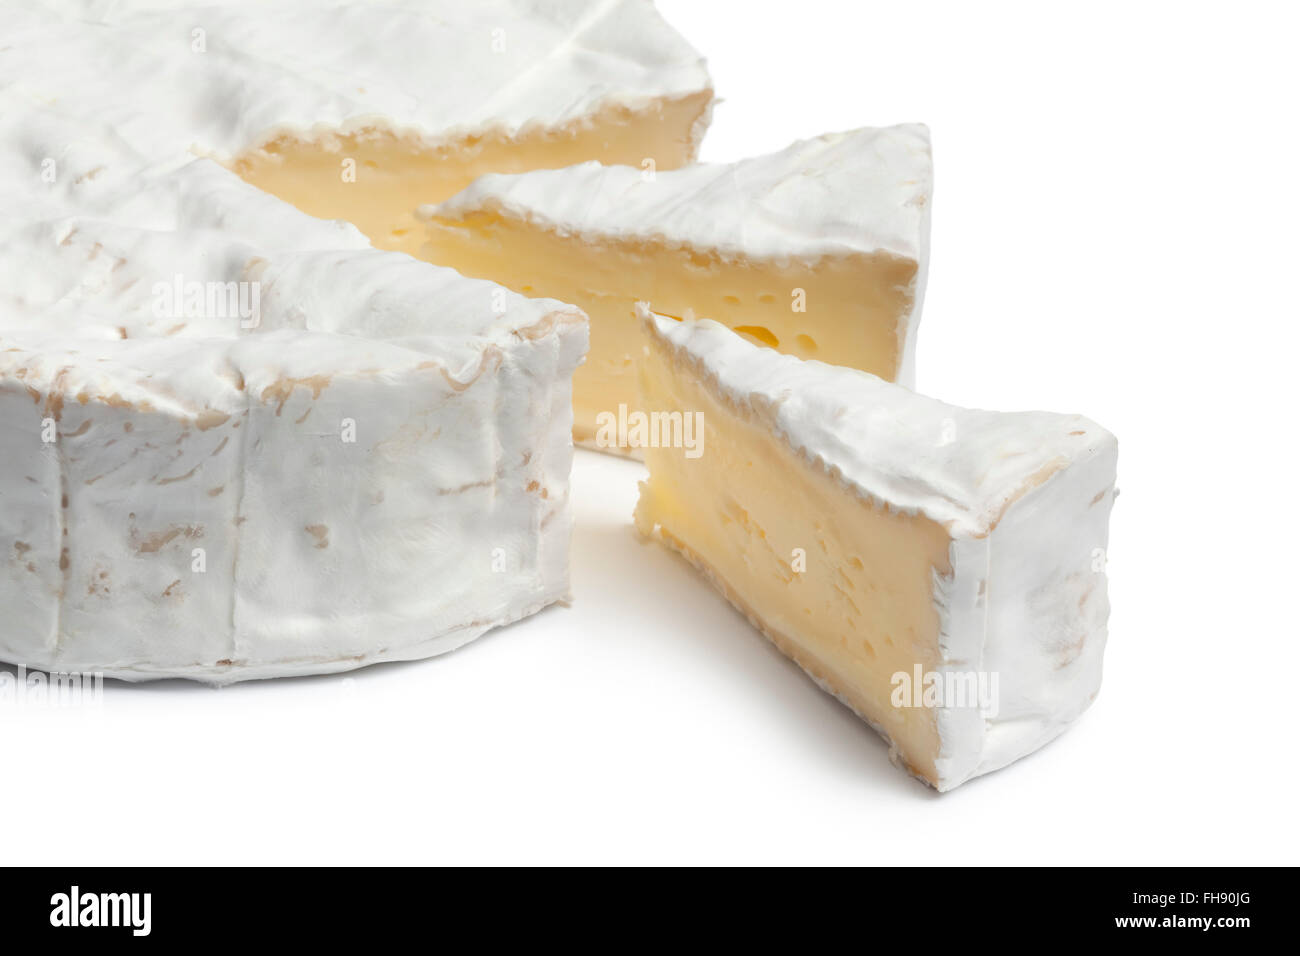 Camembert cheese and pieces close up on white background Stock Photo